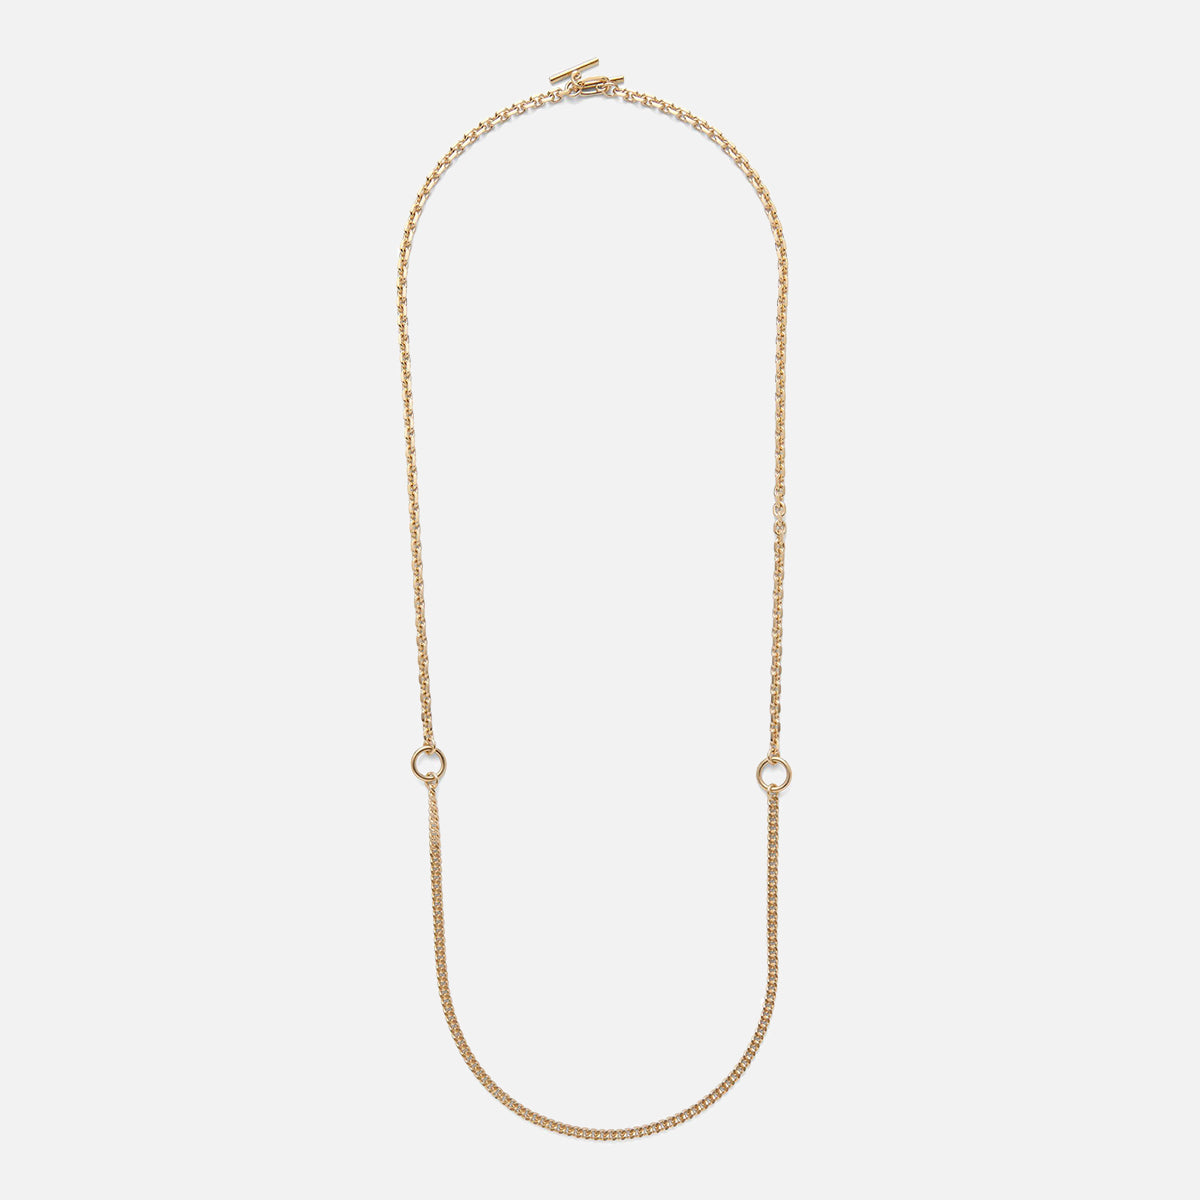 3 Way Necklace in Gold